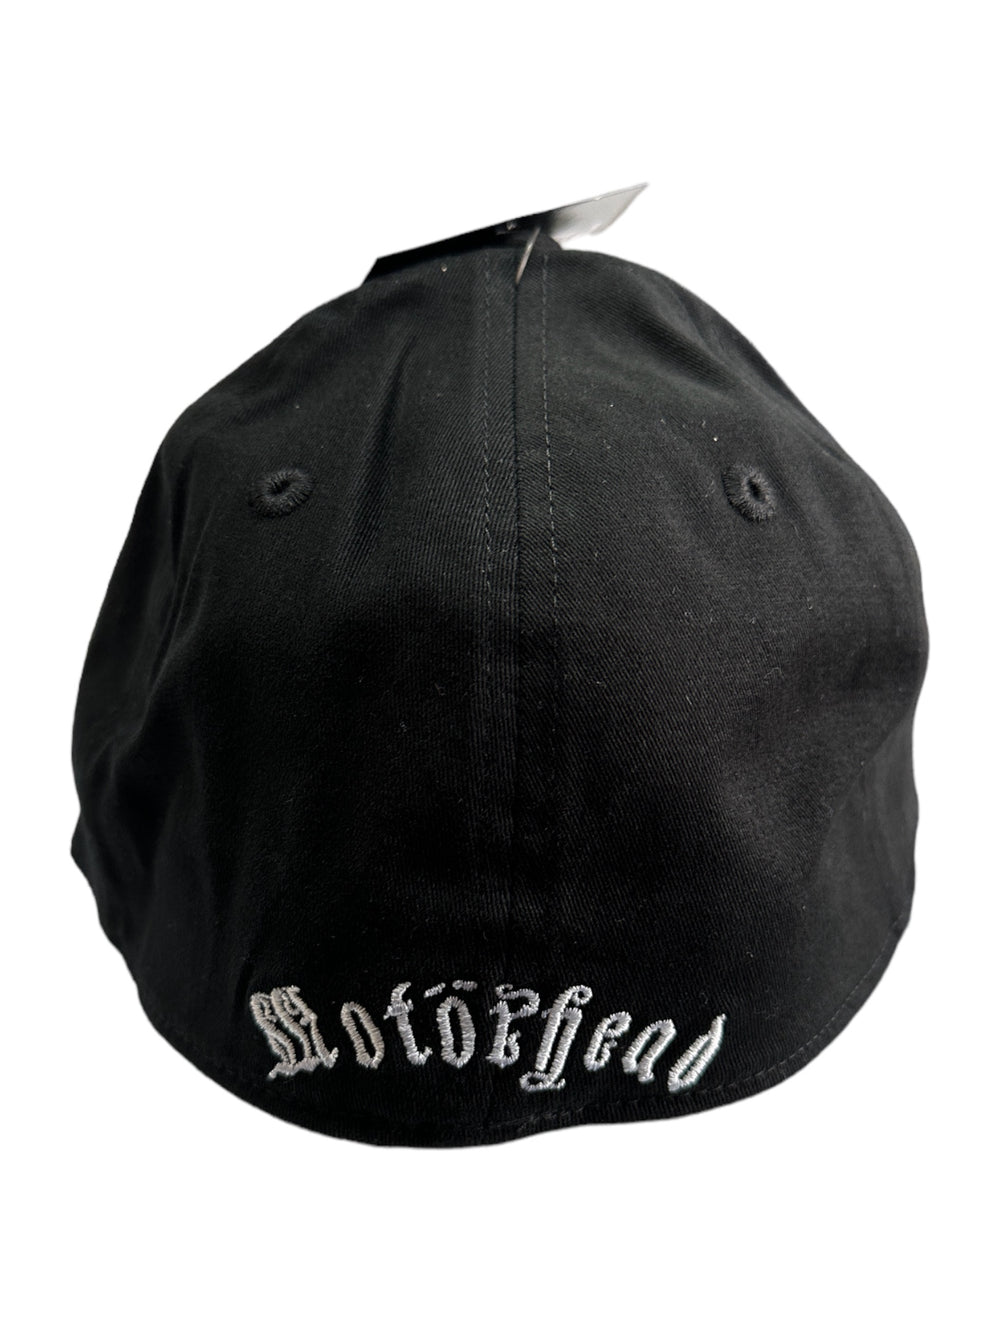 Motorhead Born To Loose Official Embroidered Peak Cap New